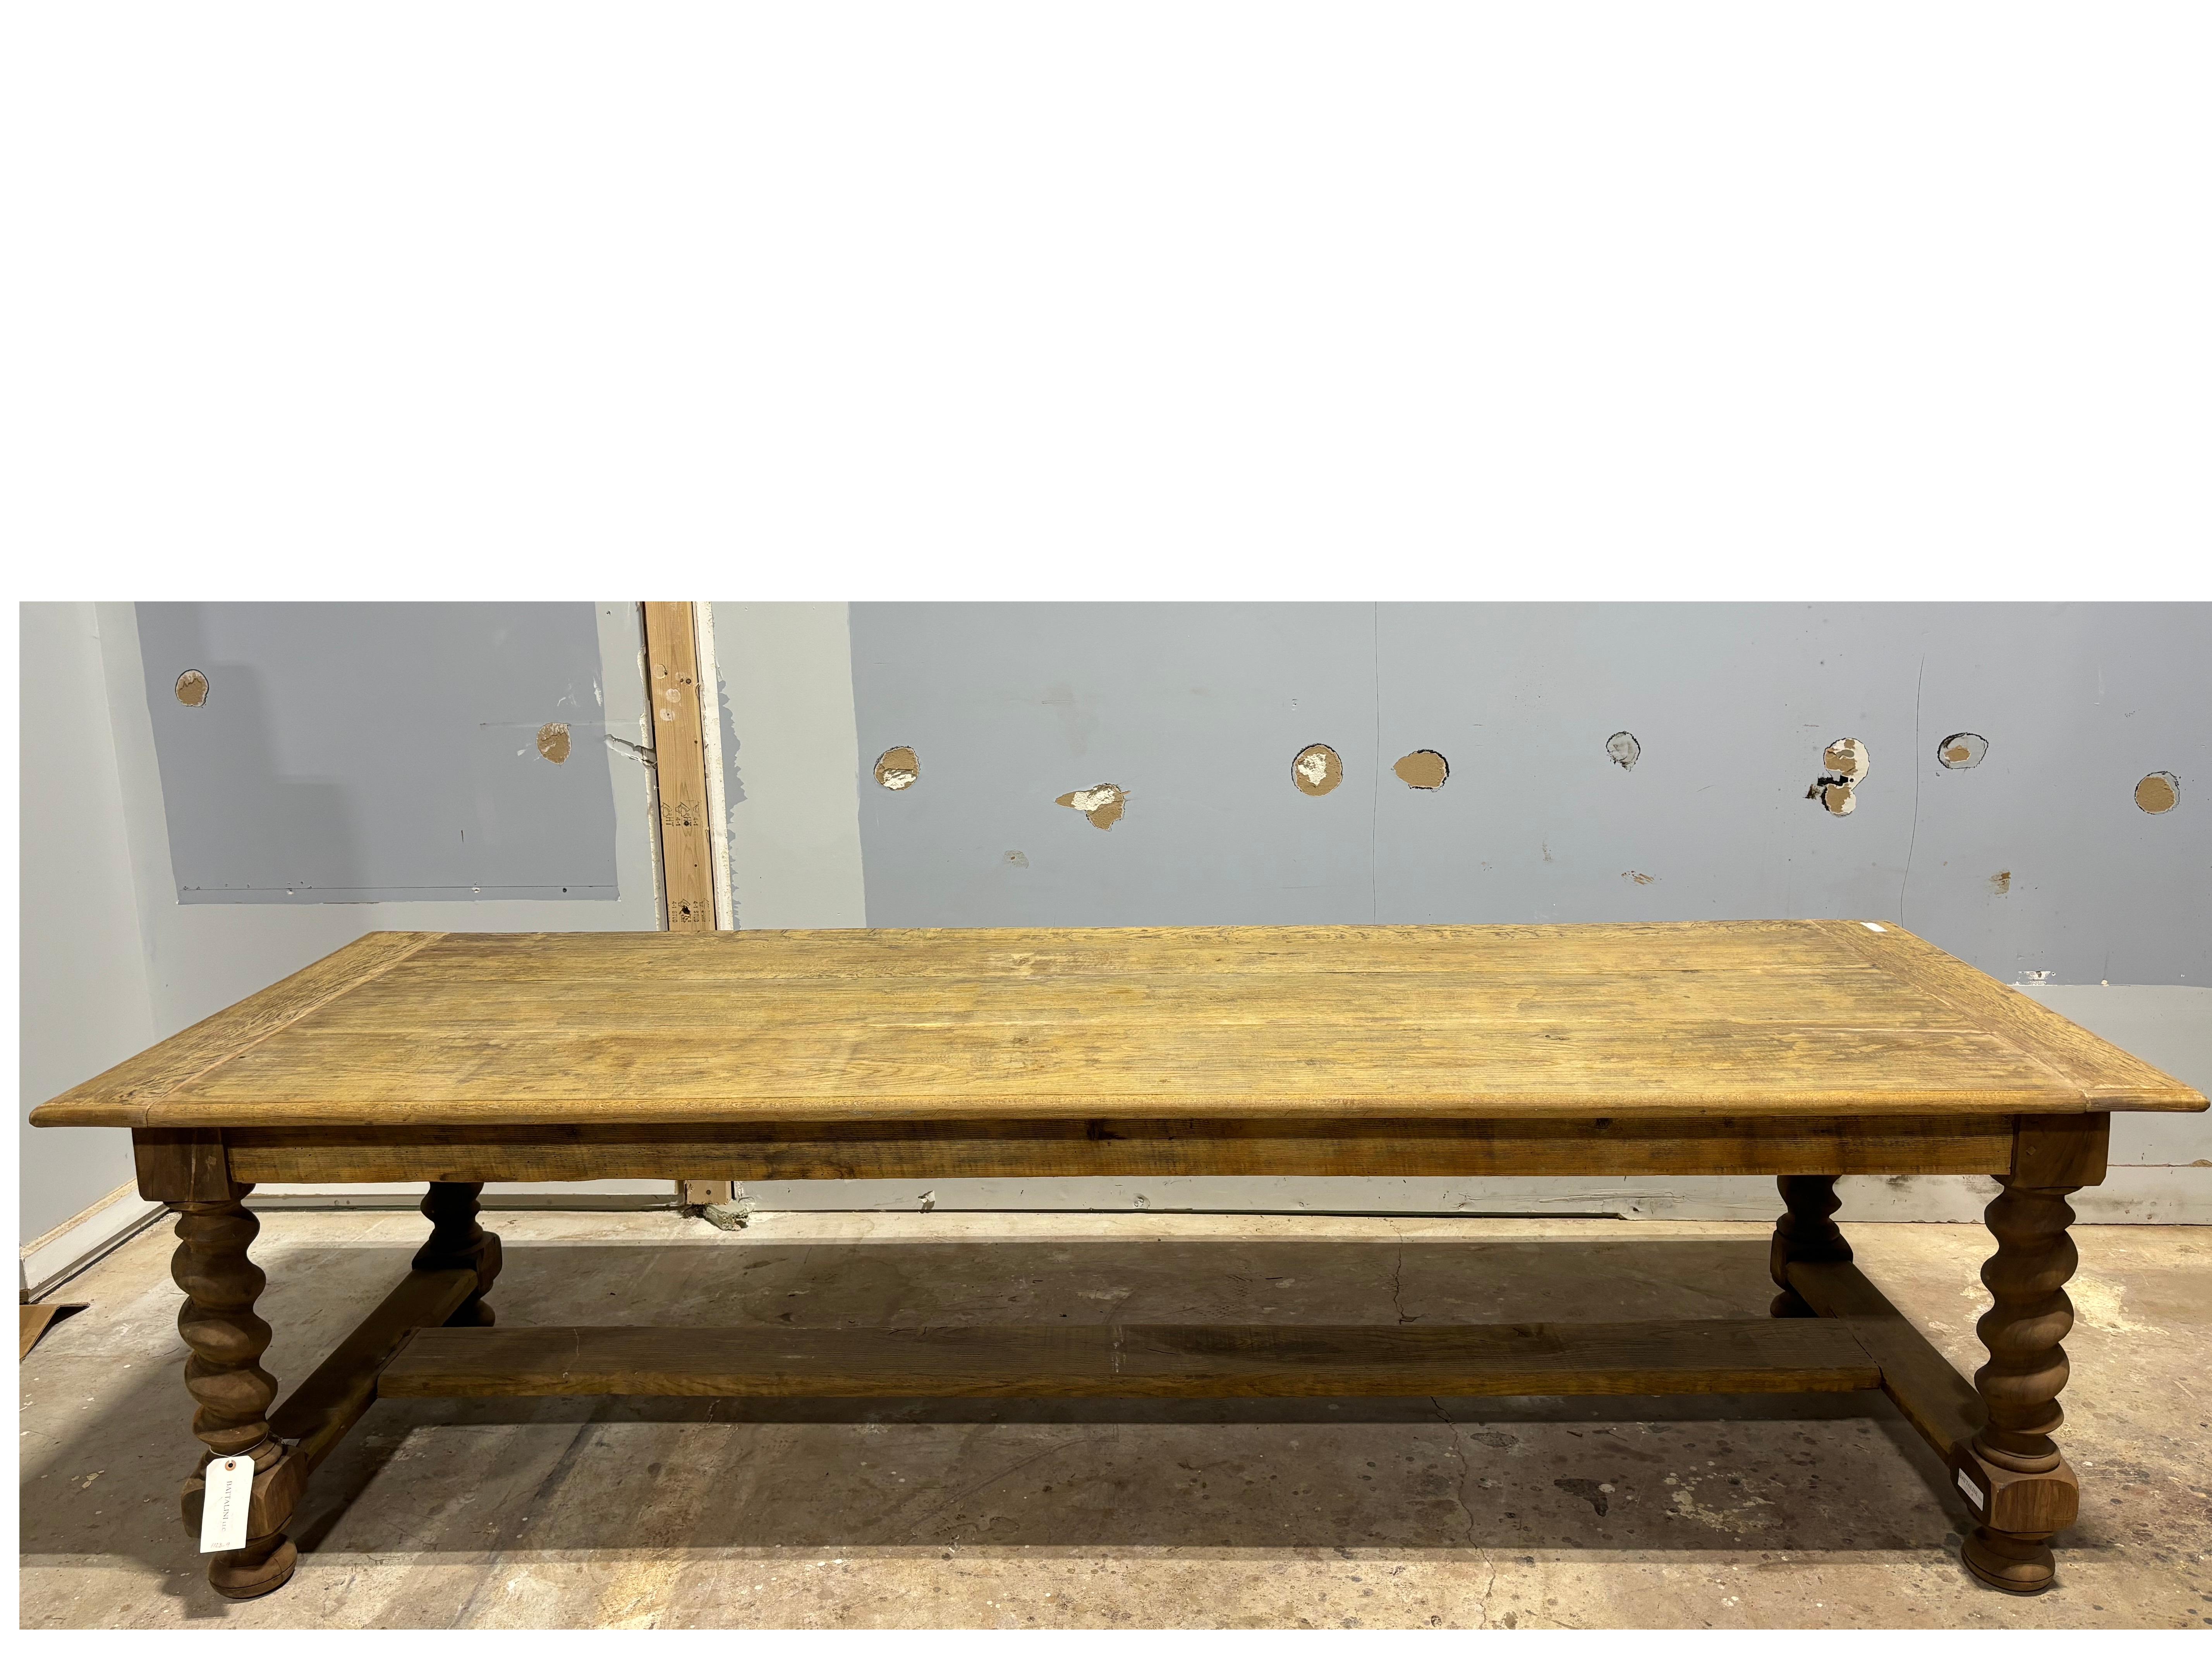 This Long Dining Table is made of oak with twisted feet. It can be place inside or outside on a porch.